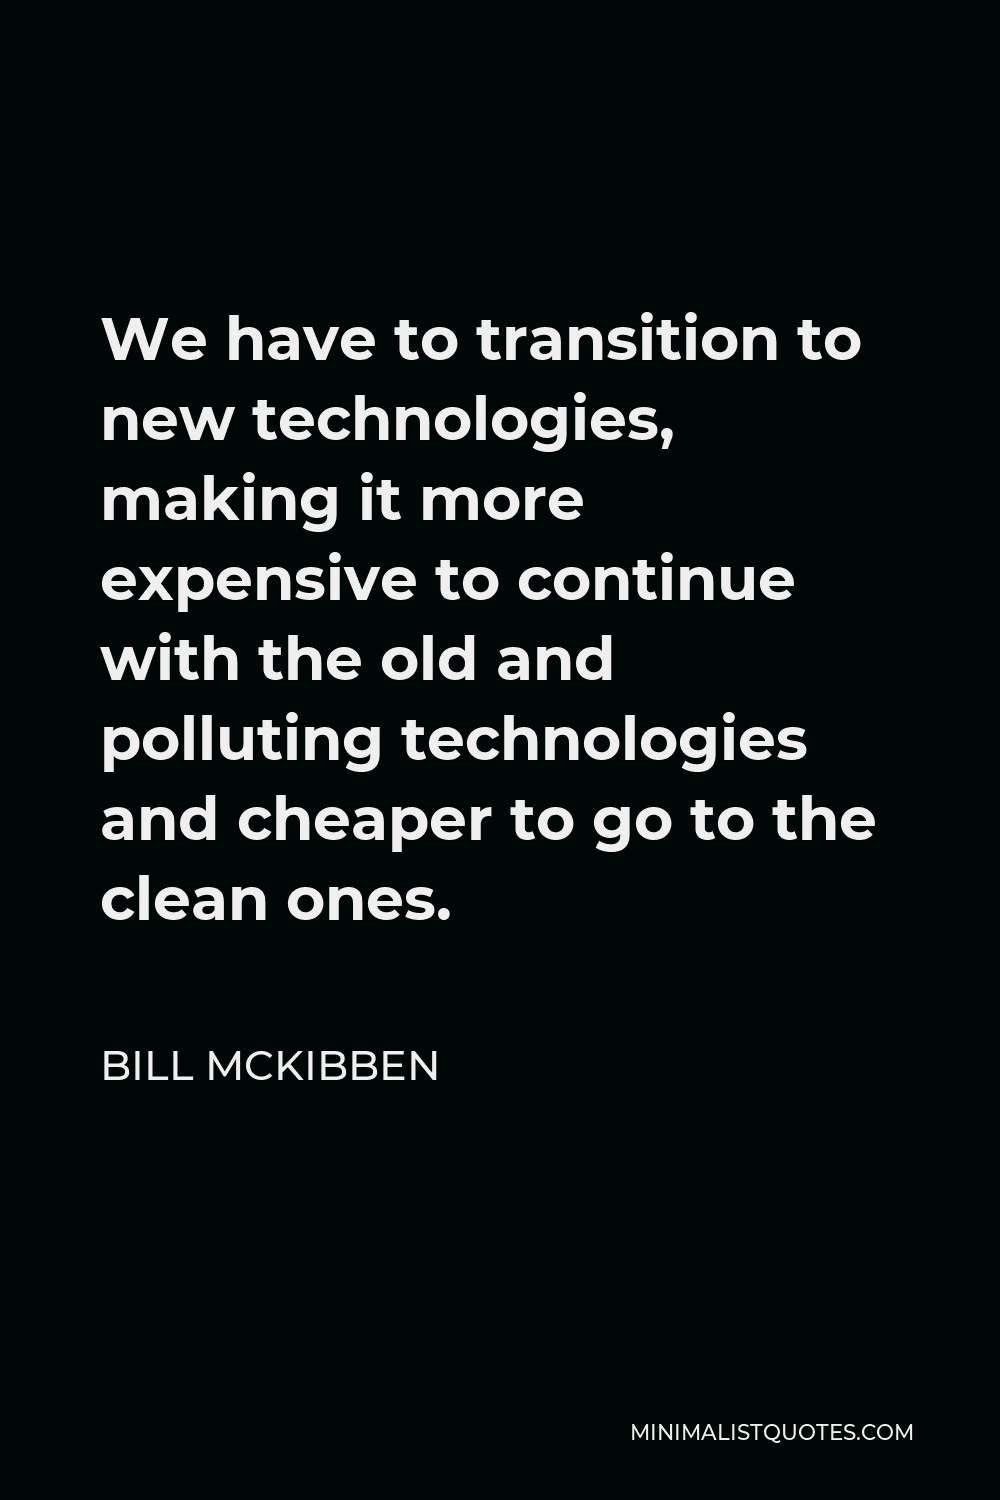 Bill McKibben Quote - We have to transition to new technologies, making it more expensive to continue with the old and polluting technologies and cheaper to go to the clean ones.